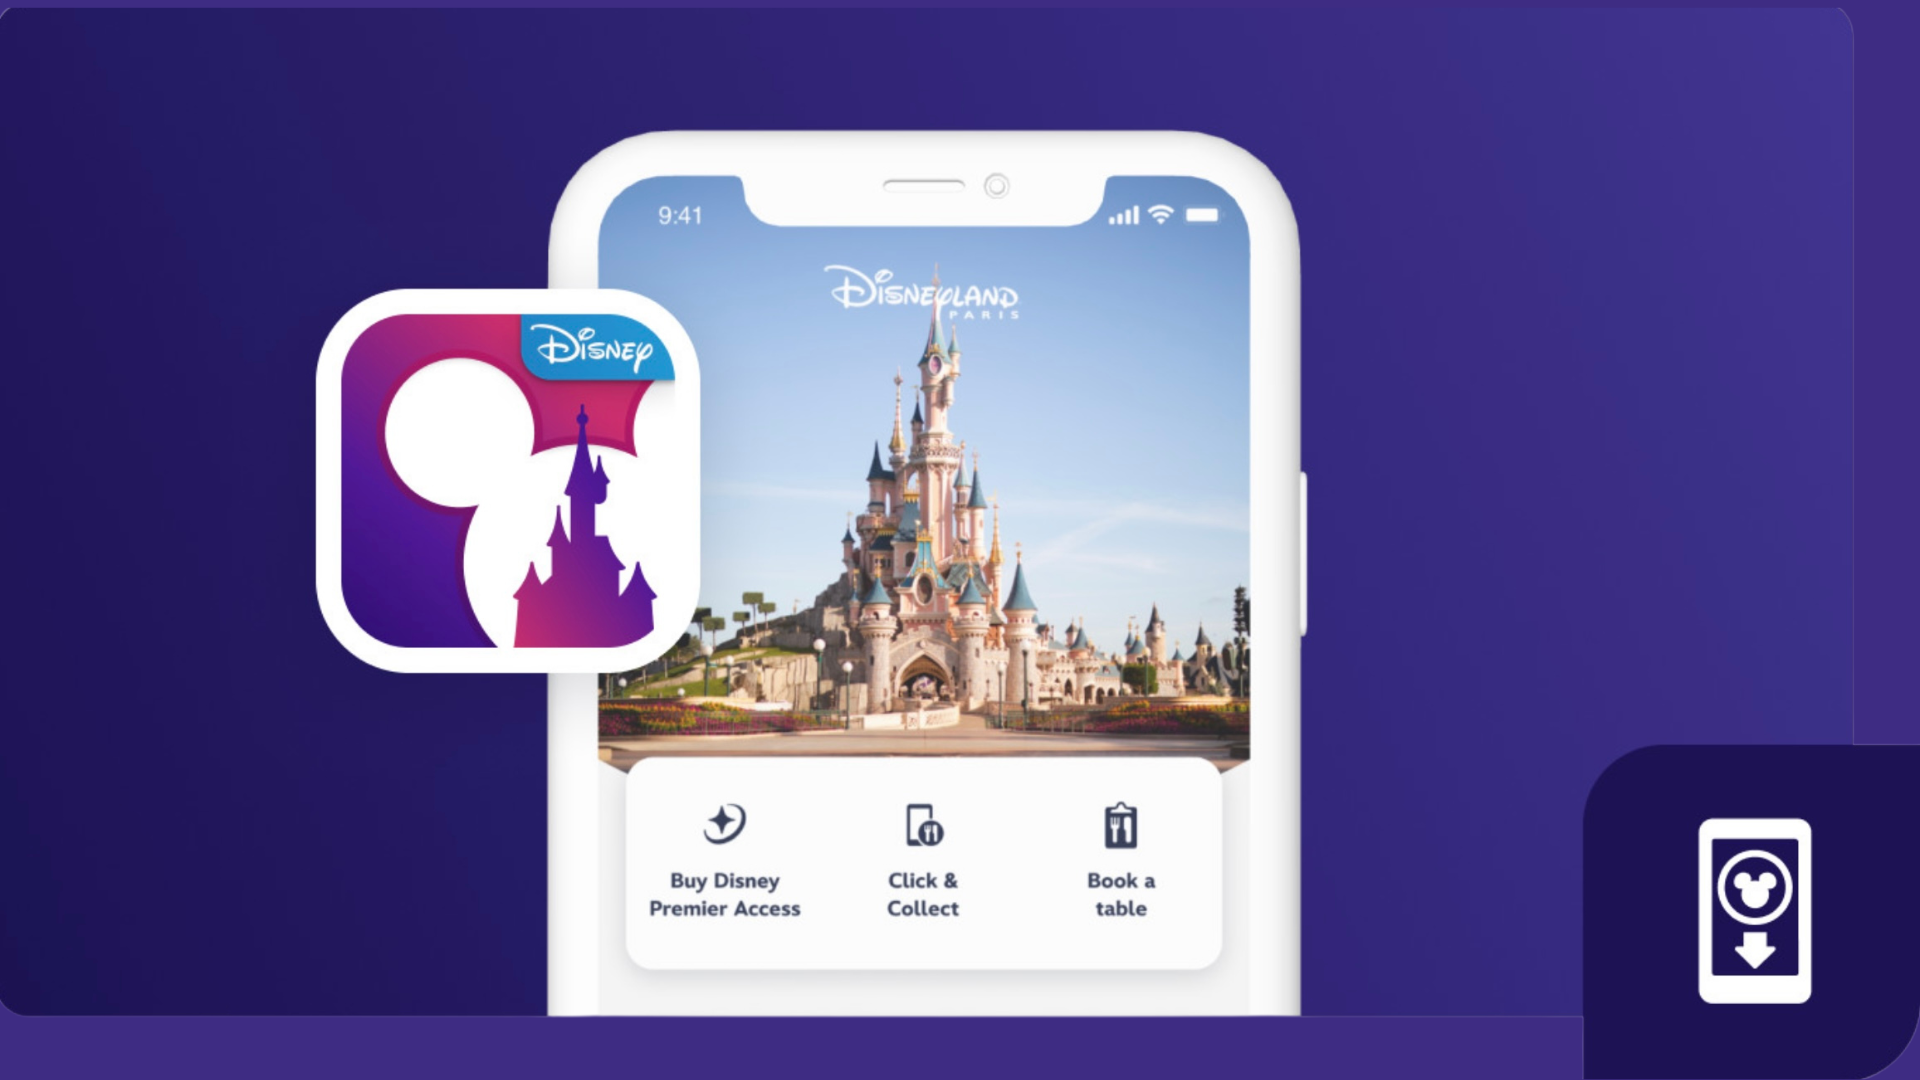 Mobile Check-in, MagicPass The Disneyland mobile app is getting even better